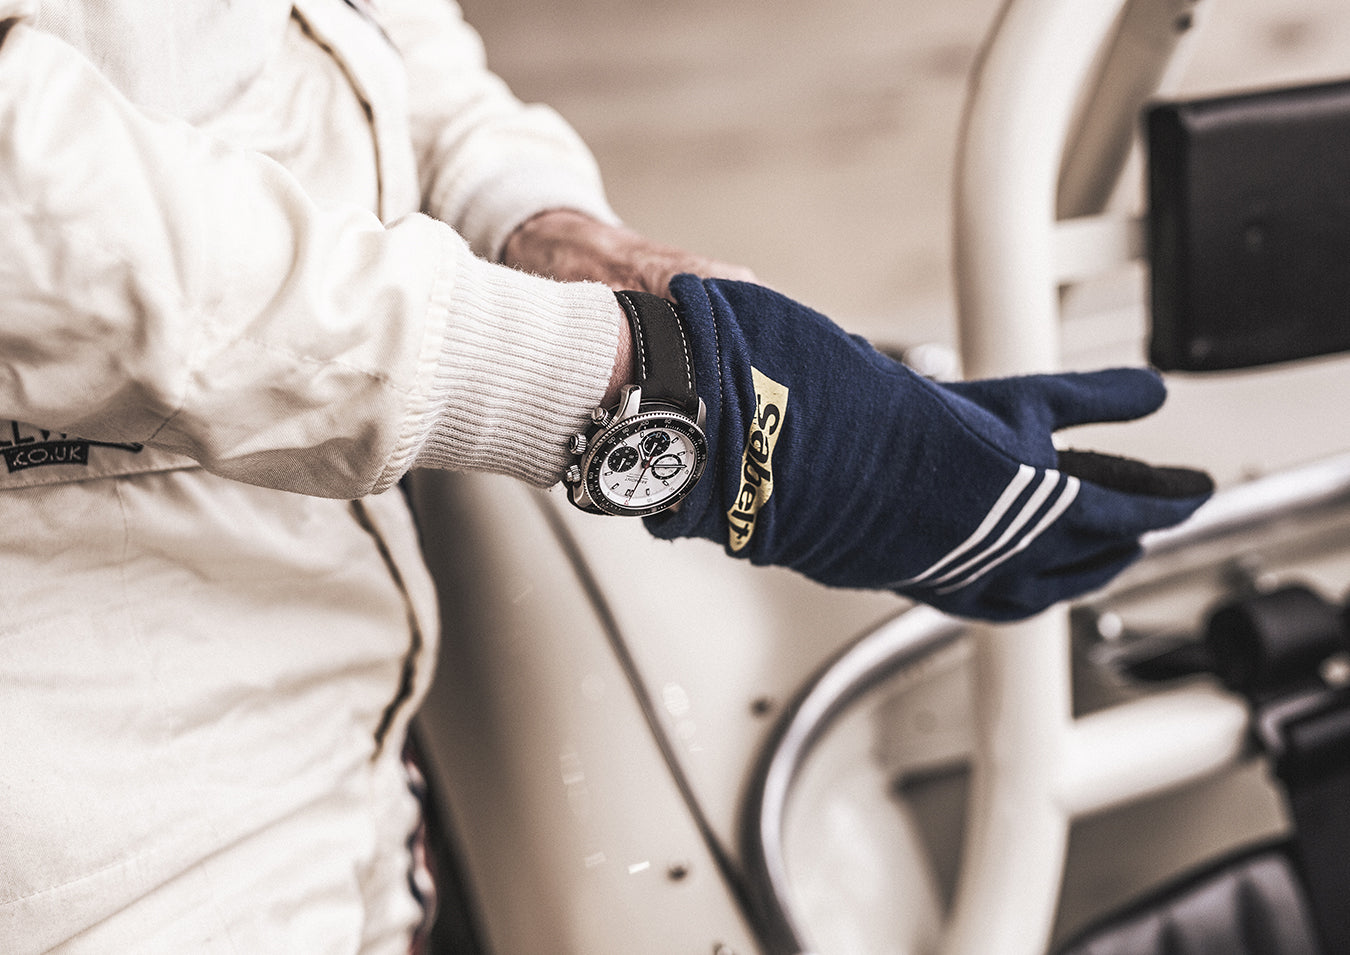 Bremont Co-Founder to compete at the Classic, Silverstone